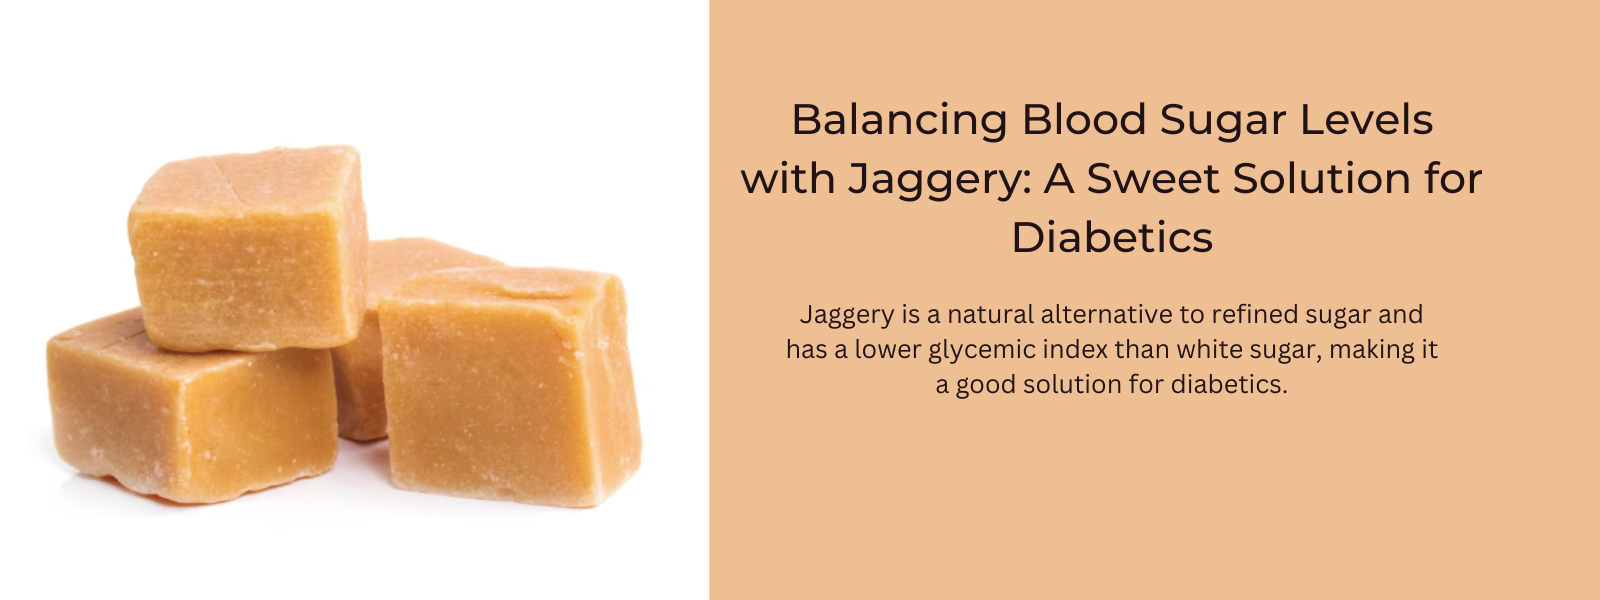 Balancing Blood Sugar Levels with Jaggery: A Sweet Solution for Diabetics